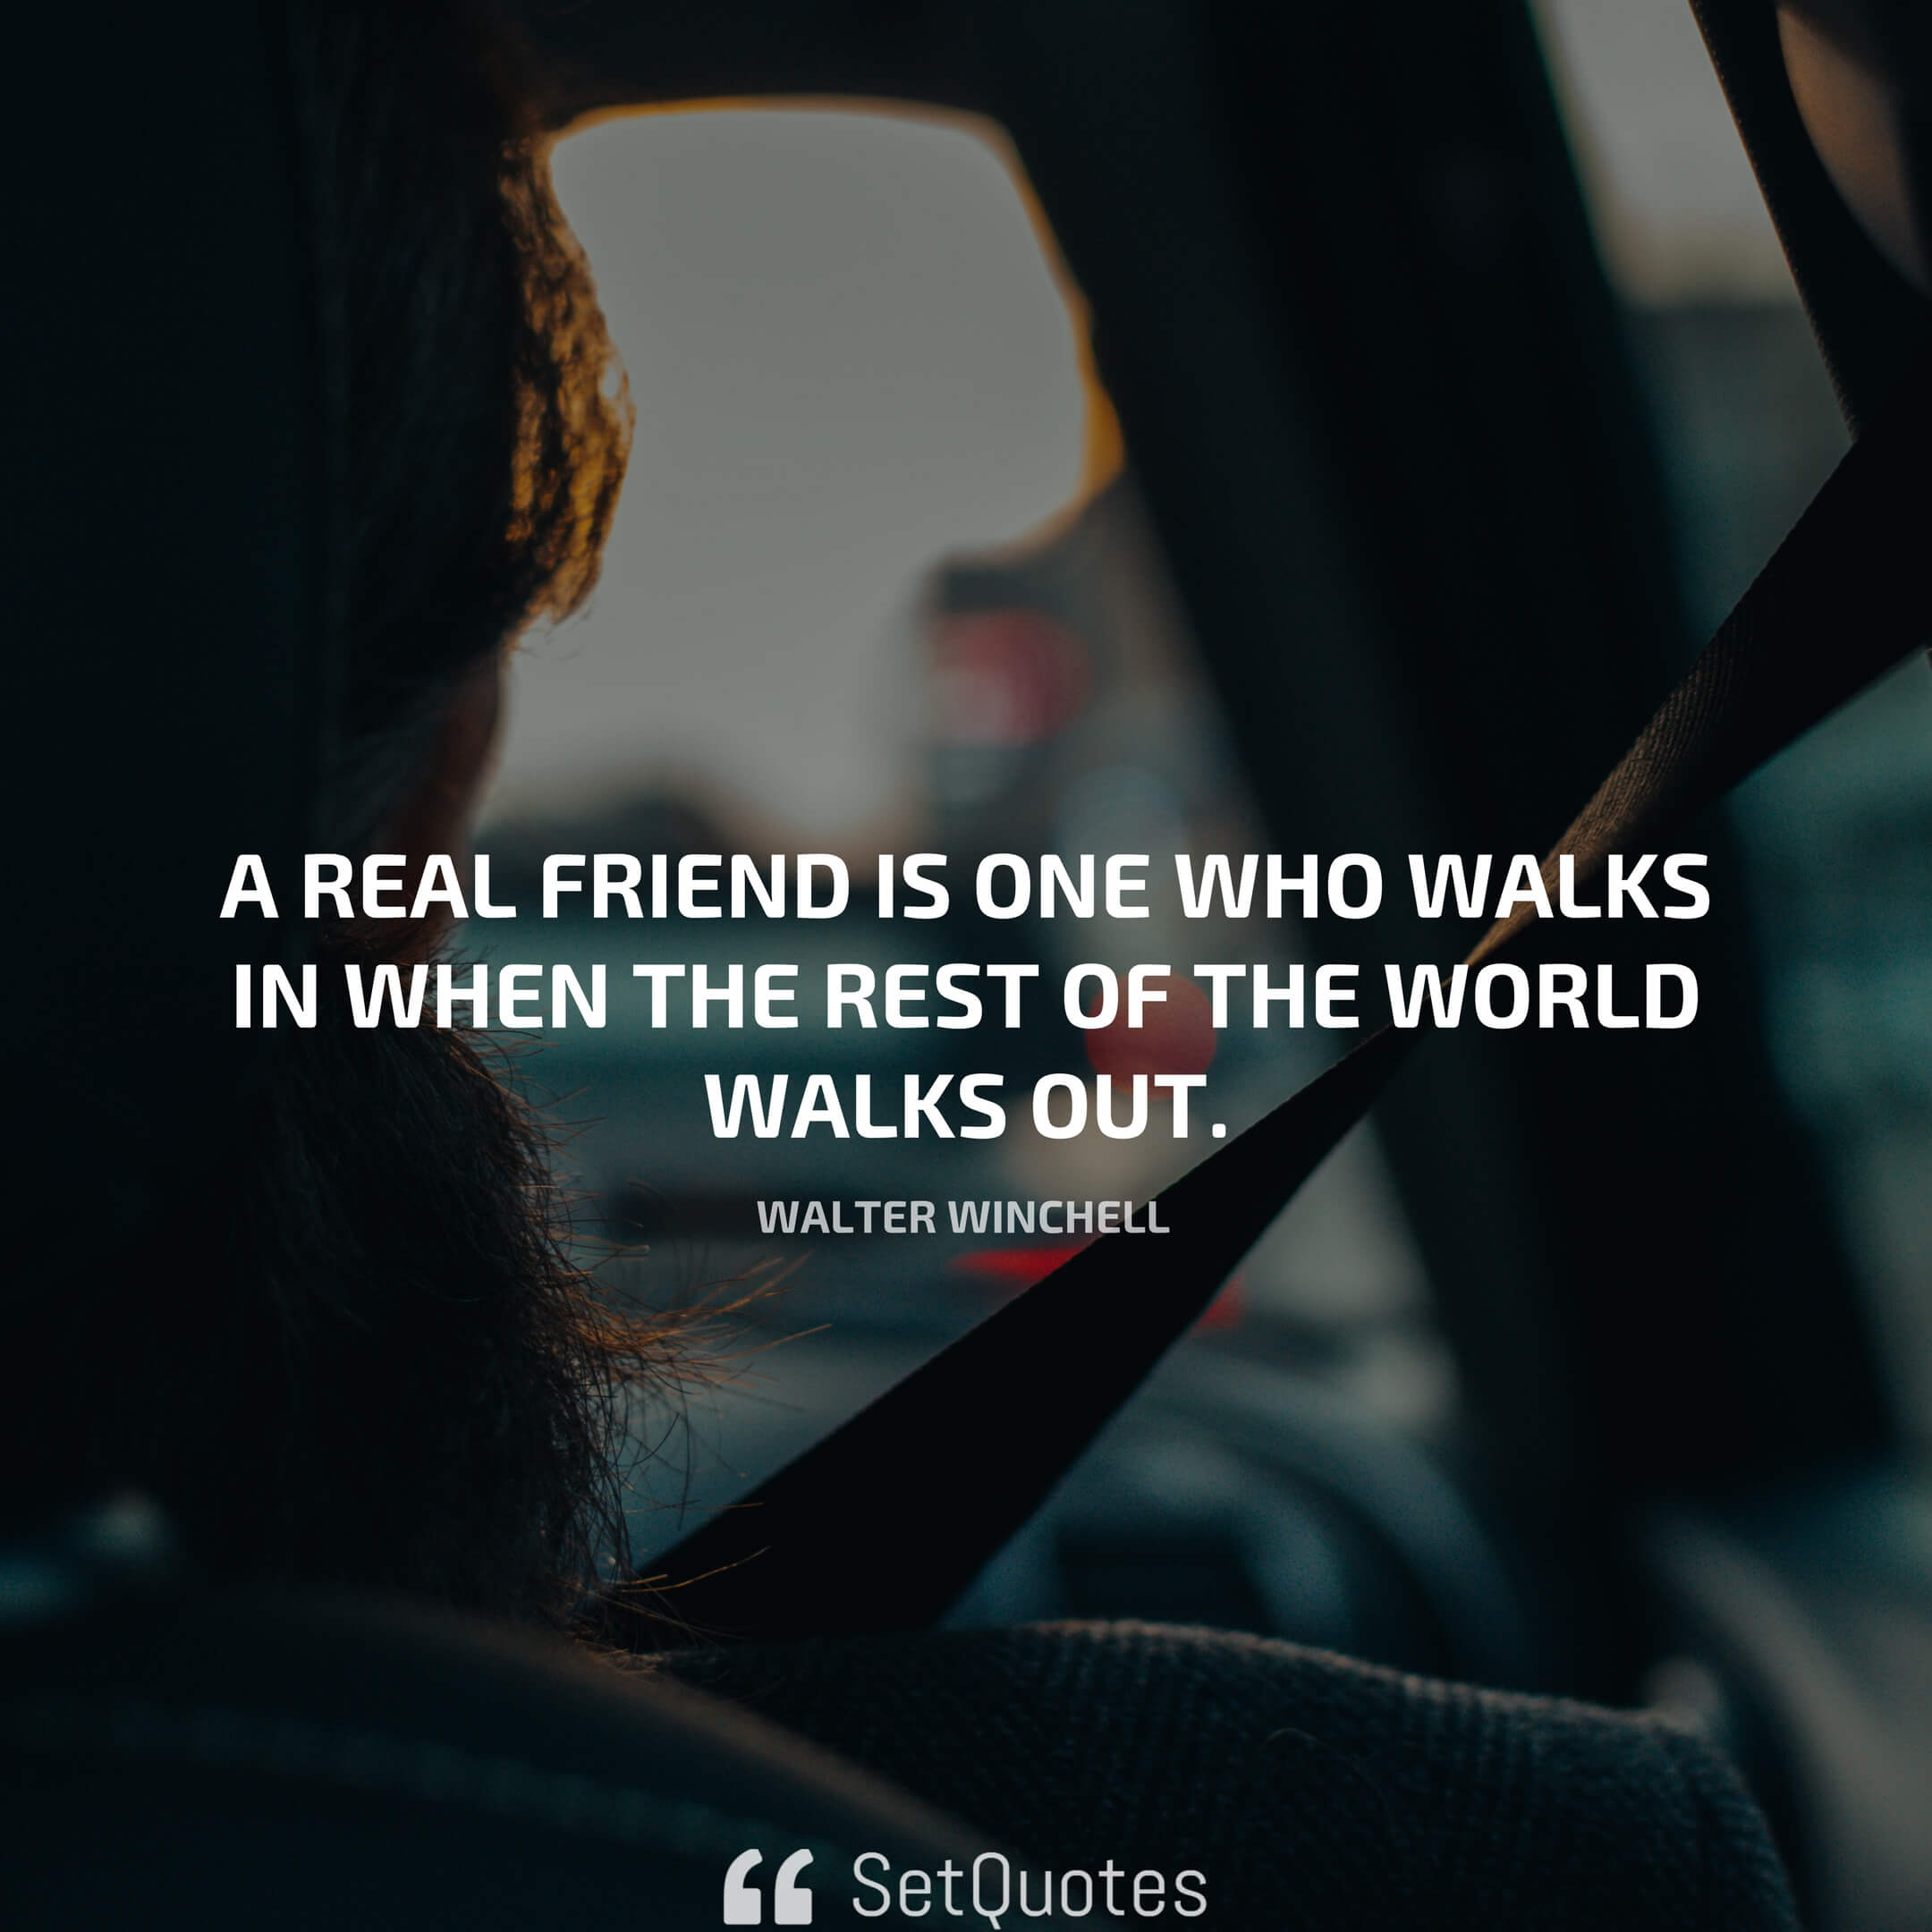 “A real friend is one who walks in when the rest of the world walks out.” – Walter Winchell